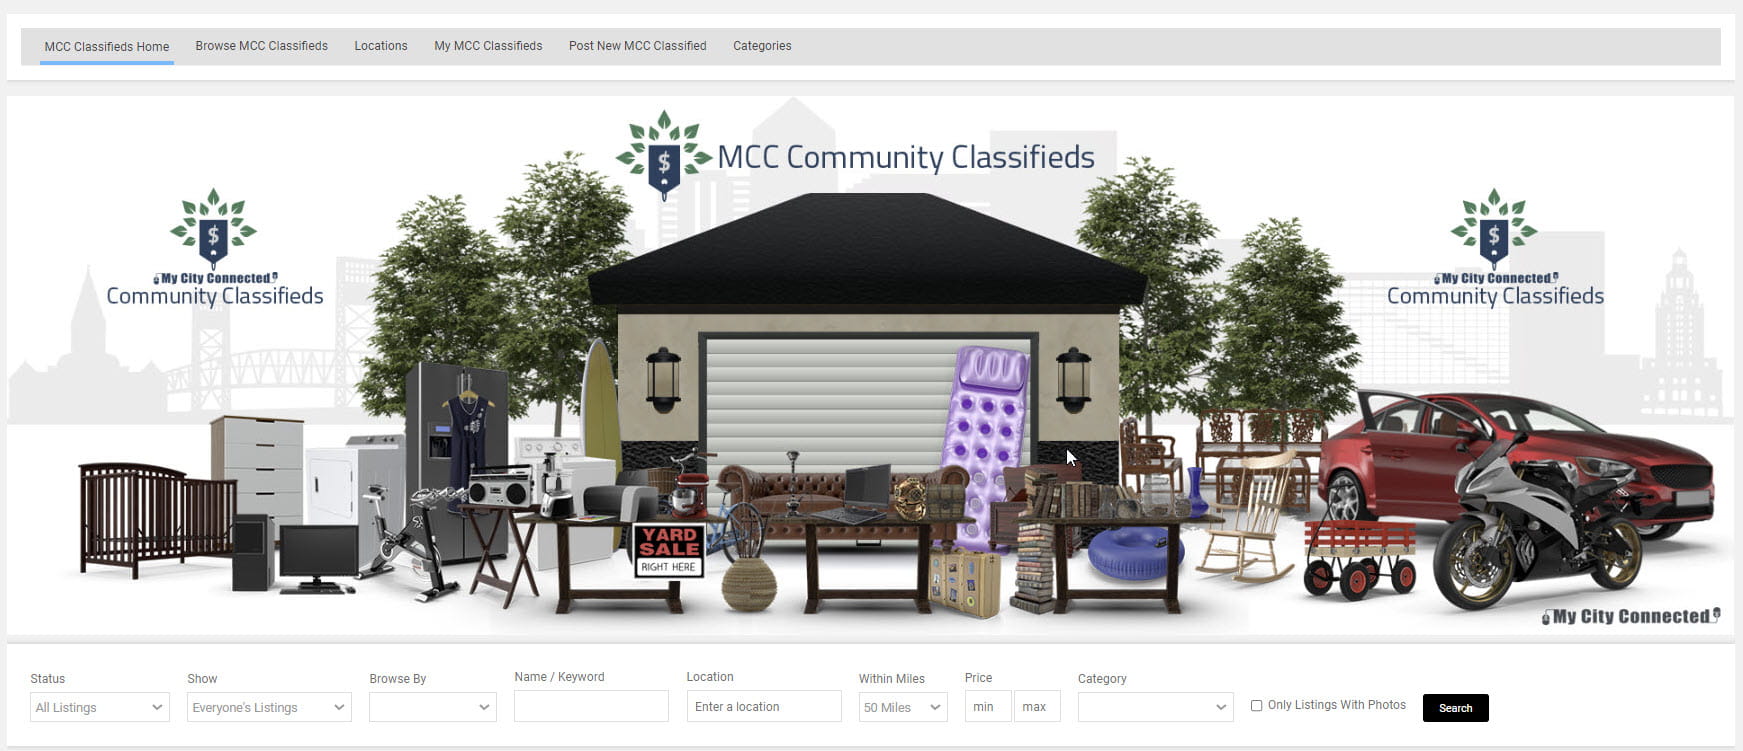 Welcome to the MCC Community Classifieds. This is where community members go to sell things. Think of it as an upgraded craiglist without all the scammers.